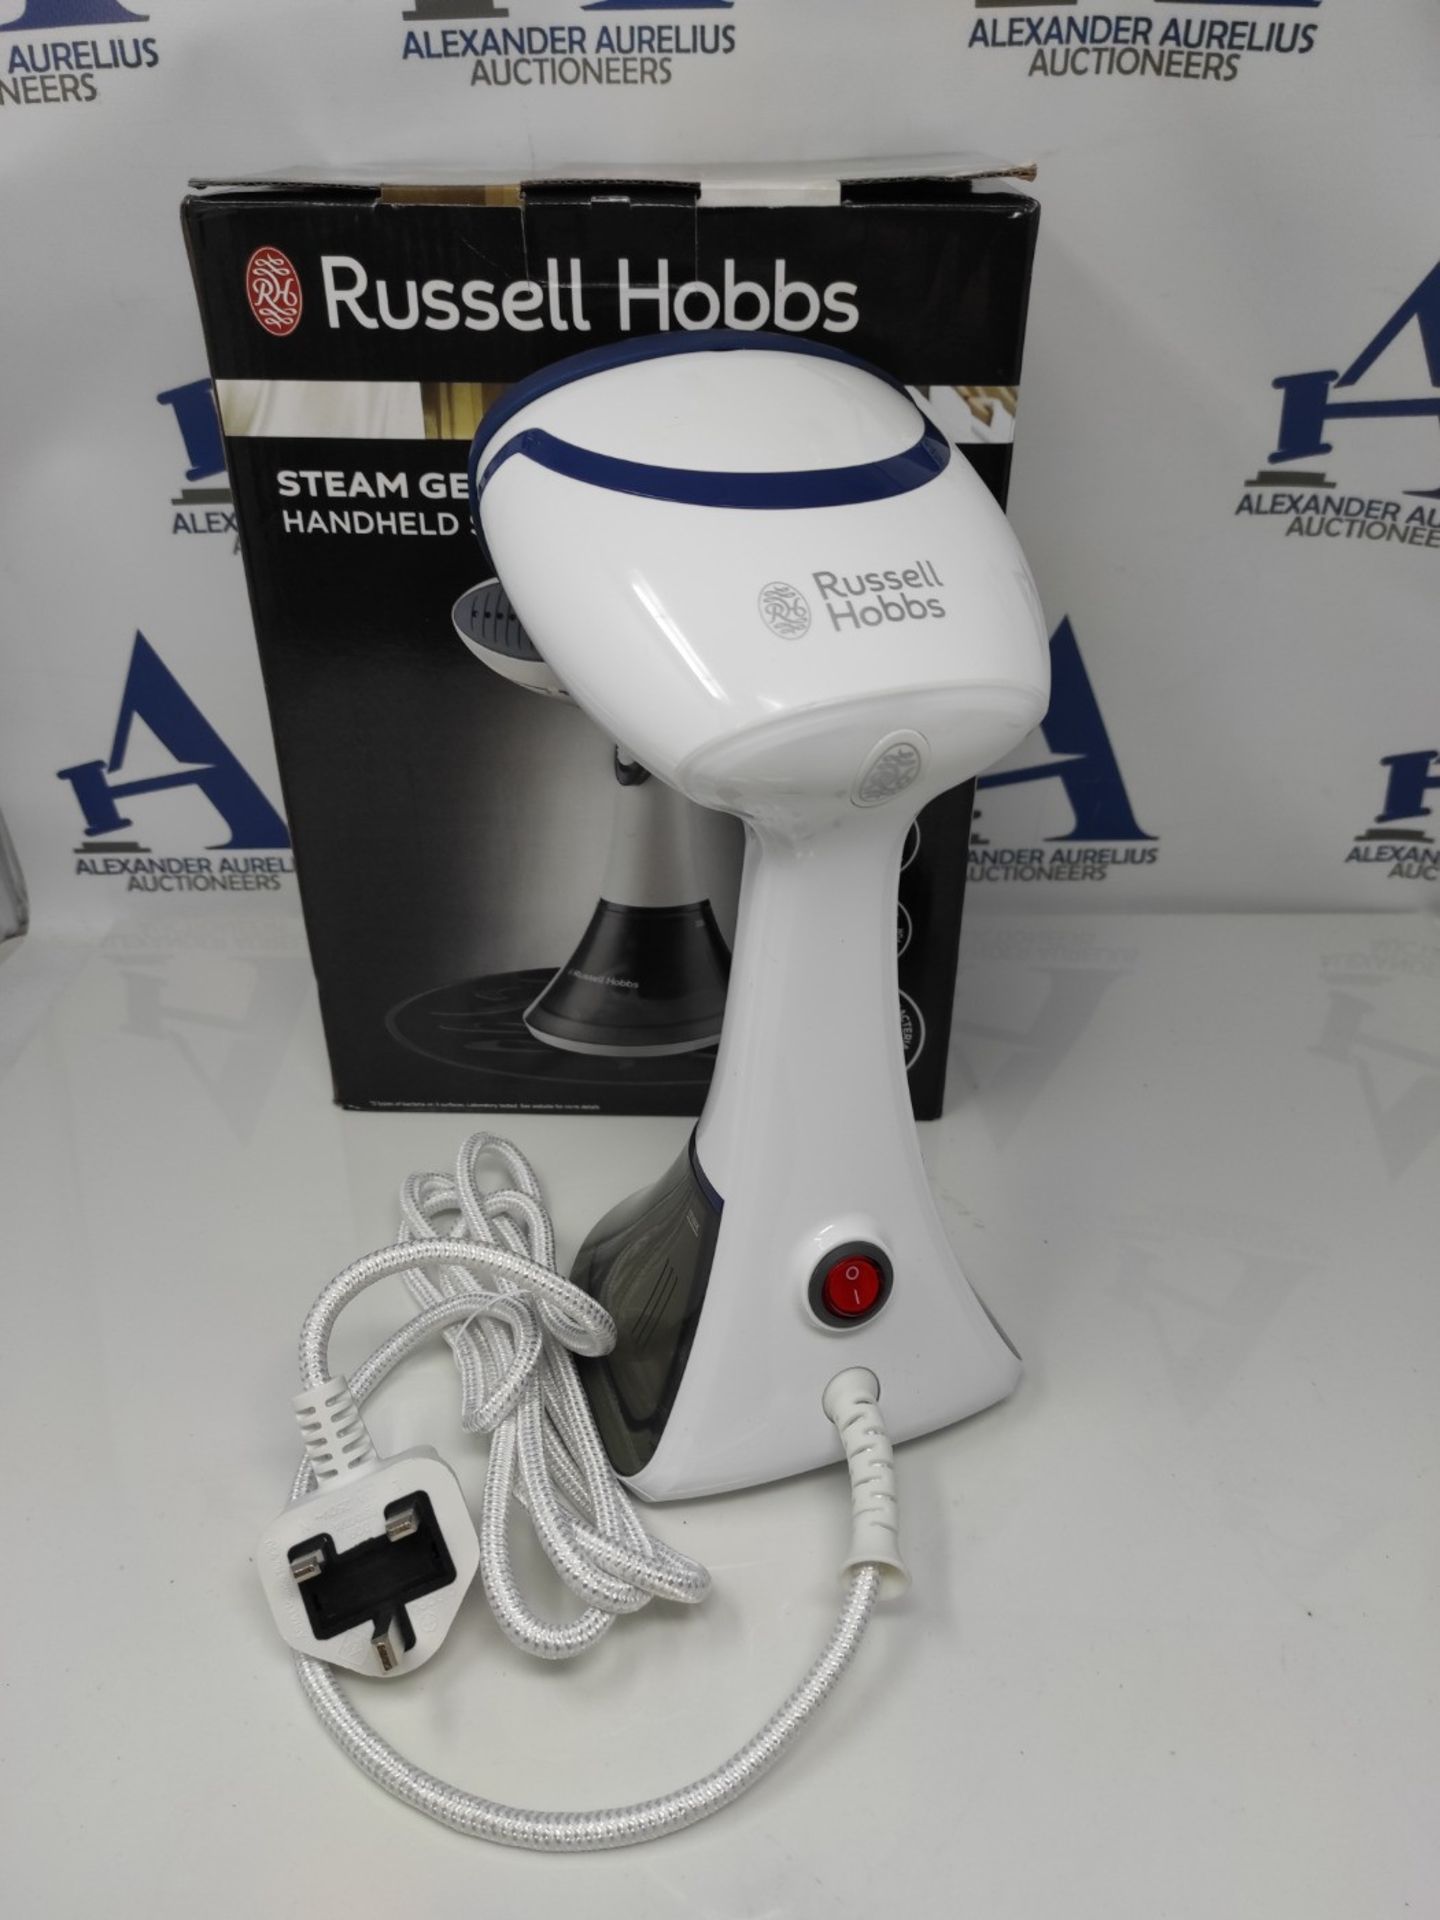 Russell Hobbs Steam Genie Handheld Clothes Steamer, No Ironing Board Needed, Ready to - Image 3 of 3